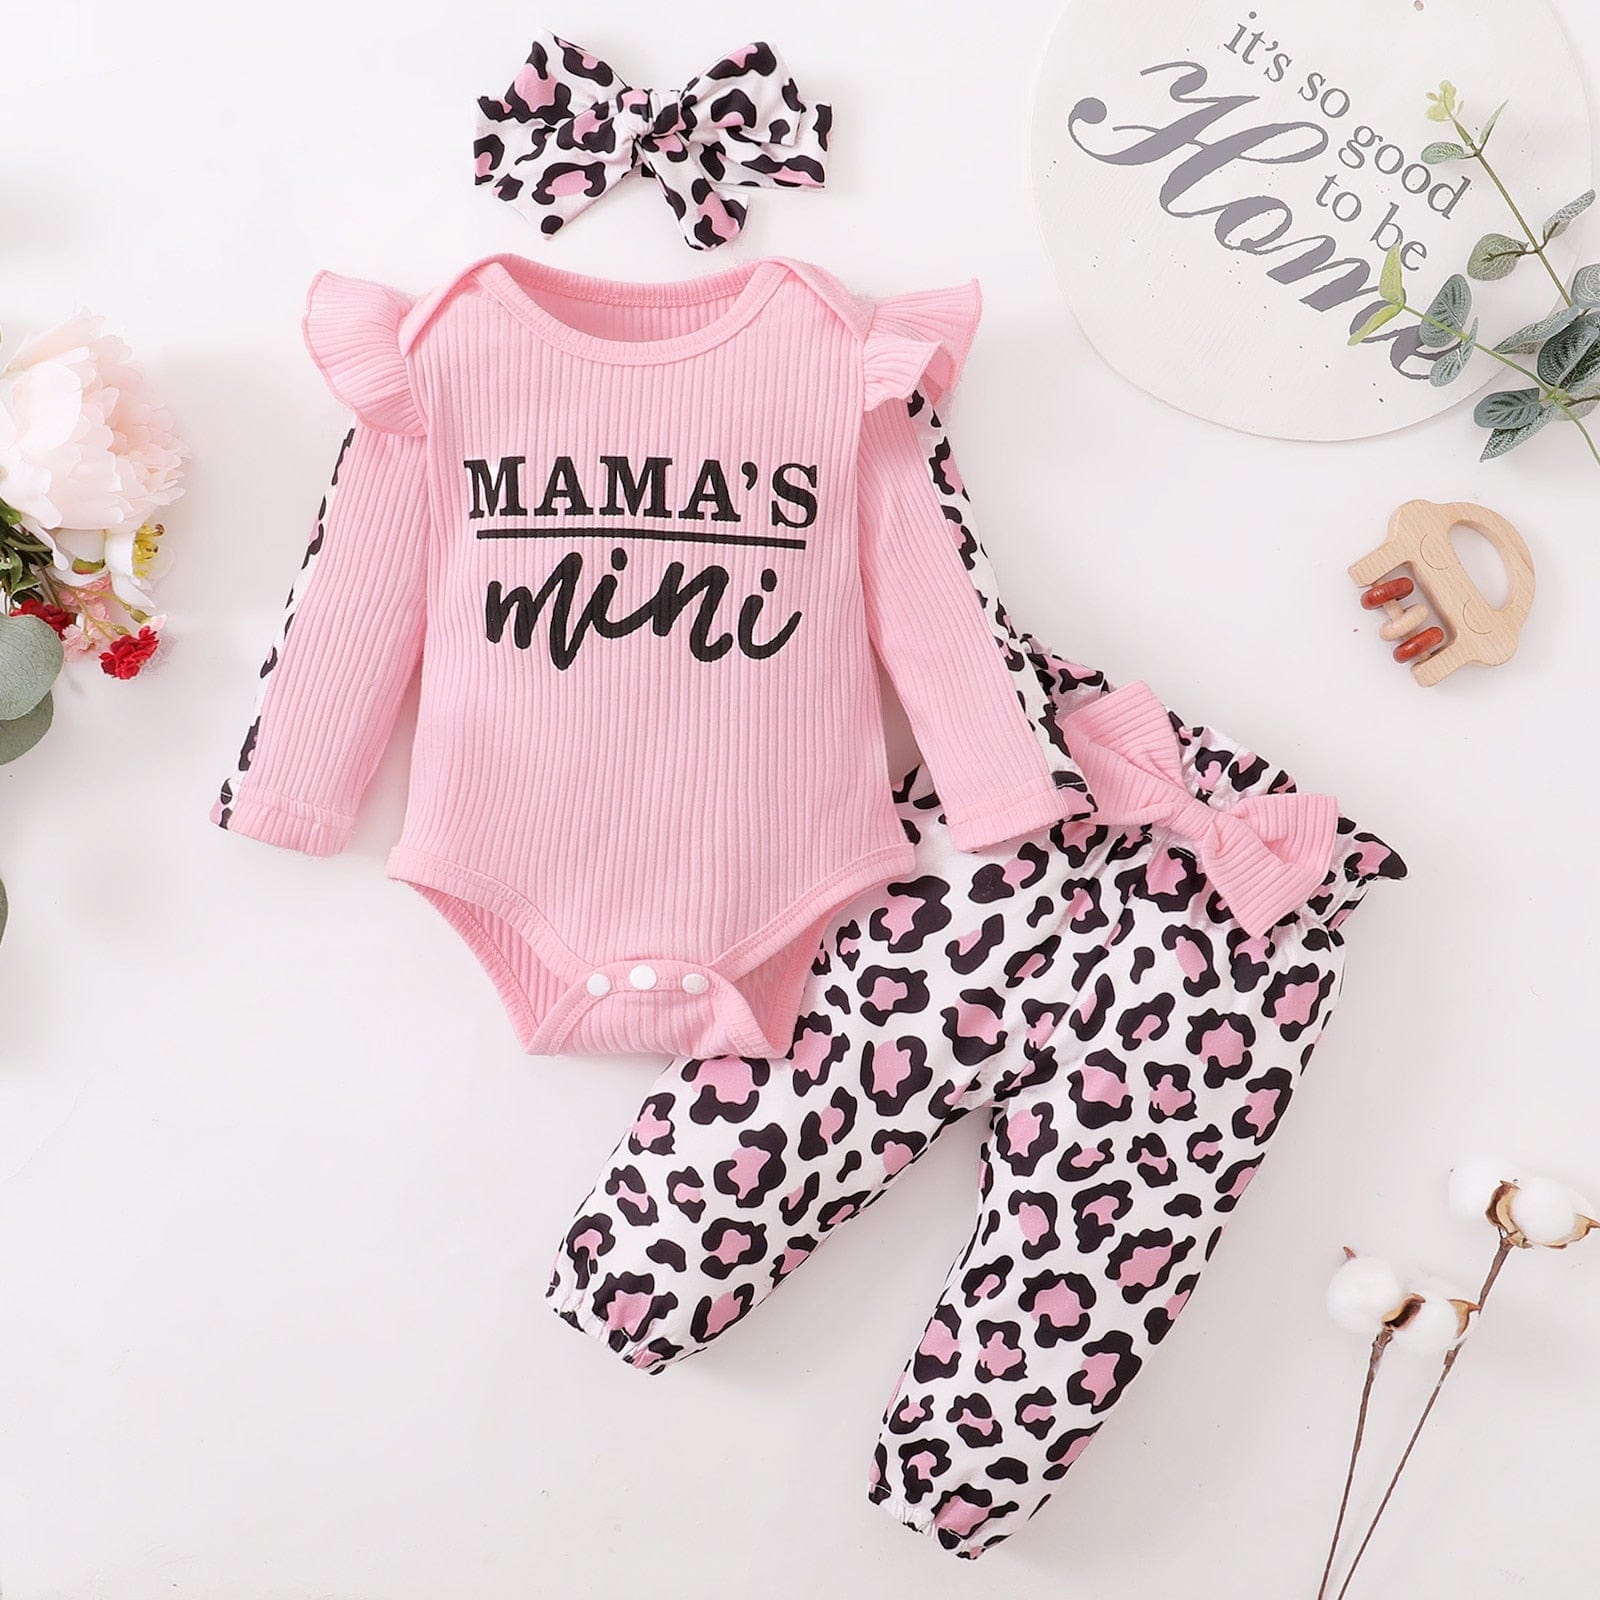 Leopard Print 3 Piece Baby Girl Set - Ideal Outfit for Your Little One